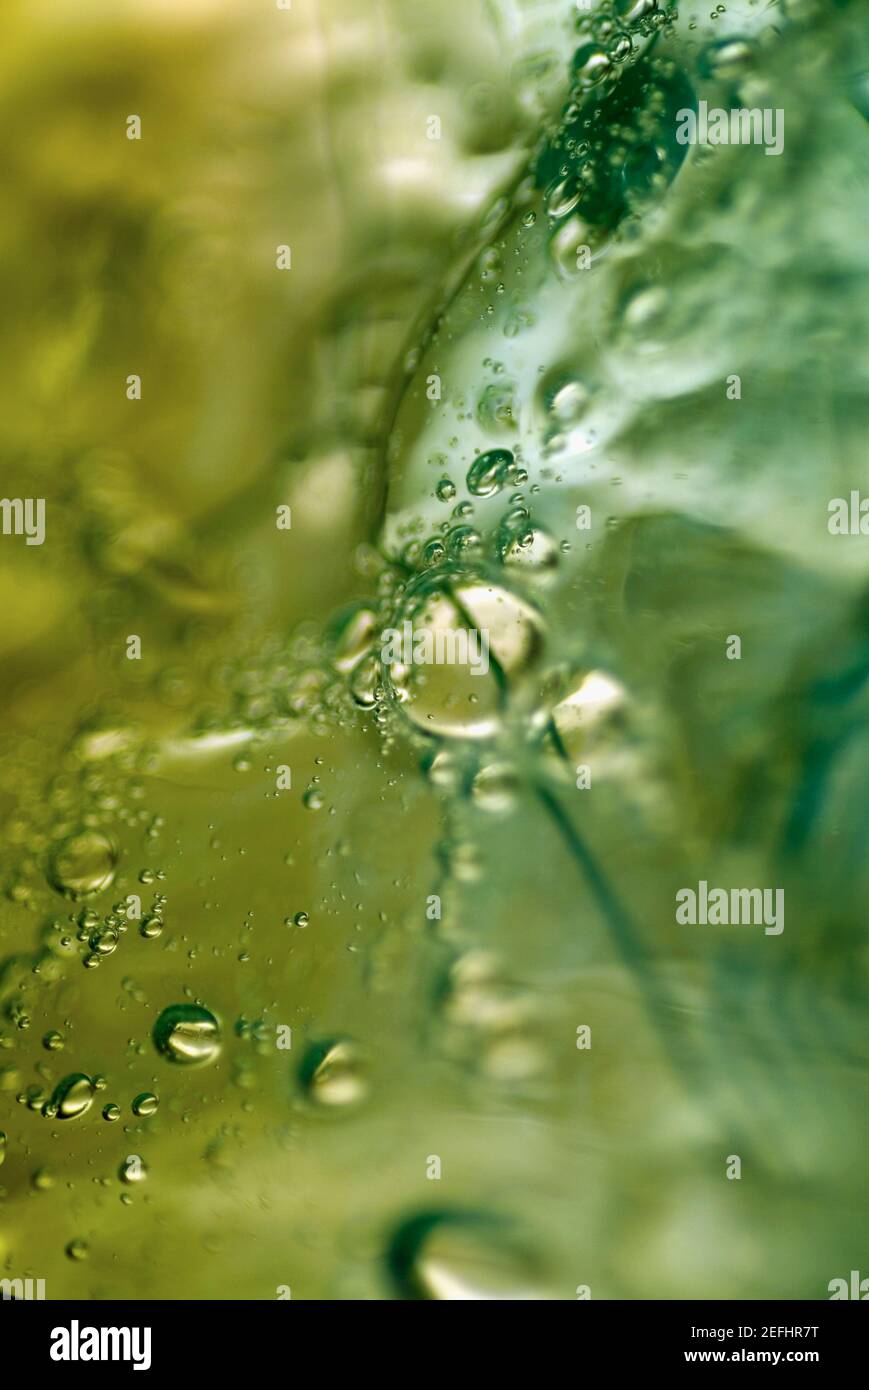 Close-up of water drops on ice cubes Stock Photo